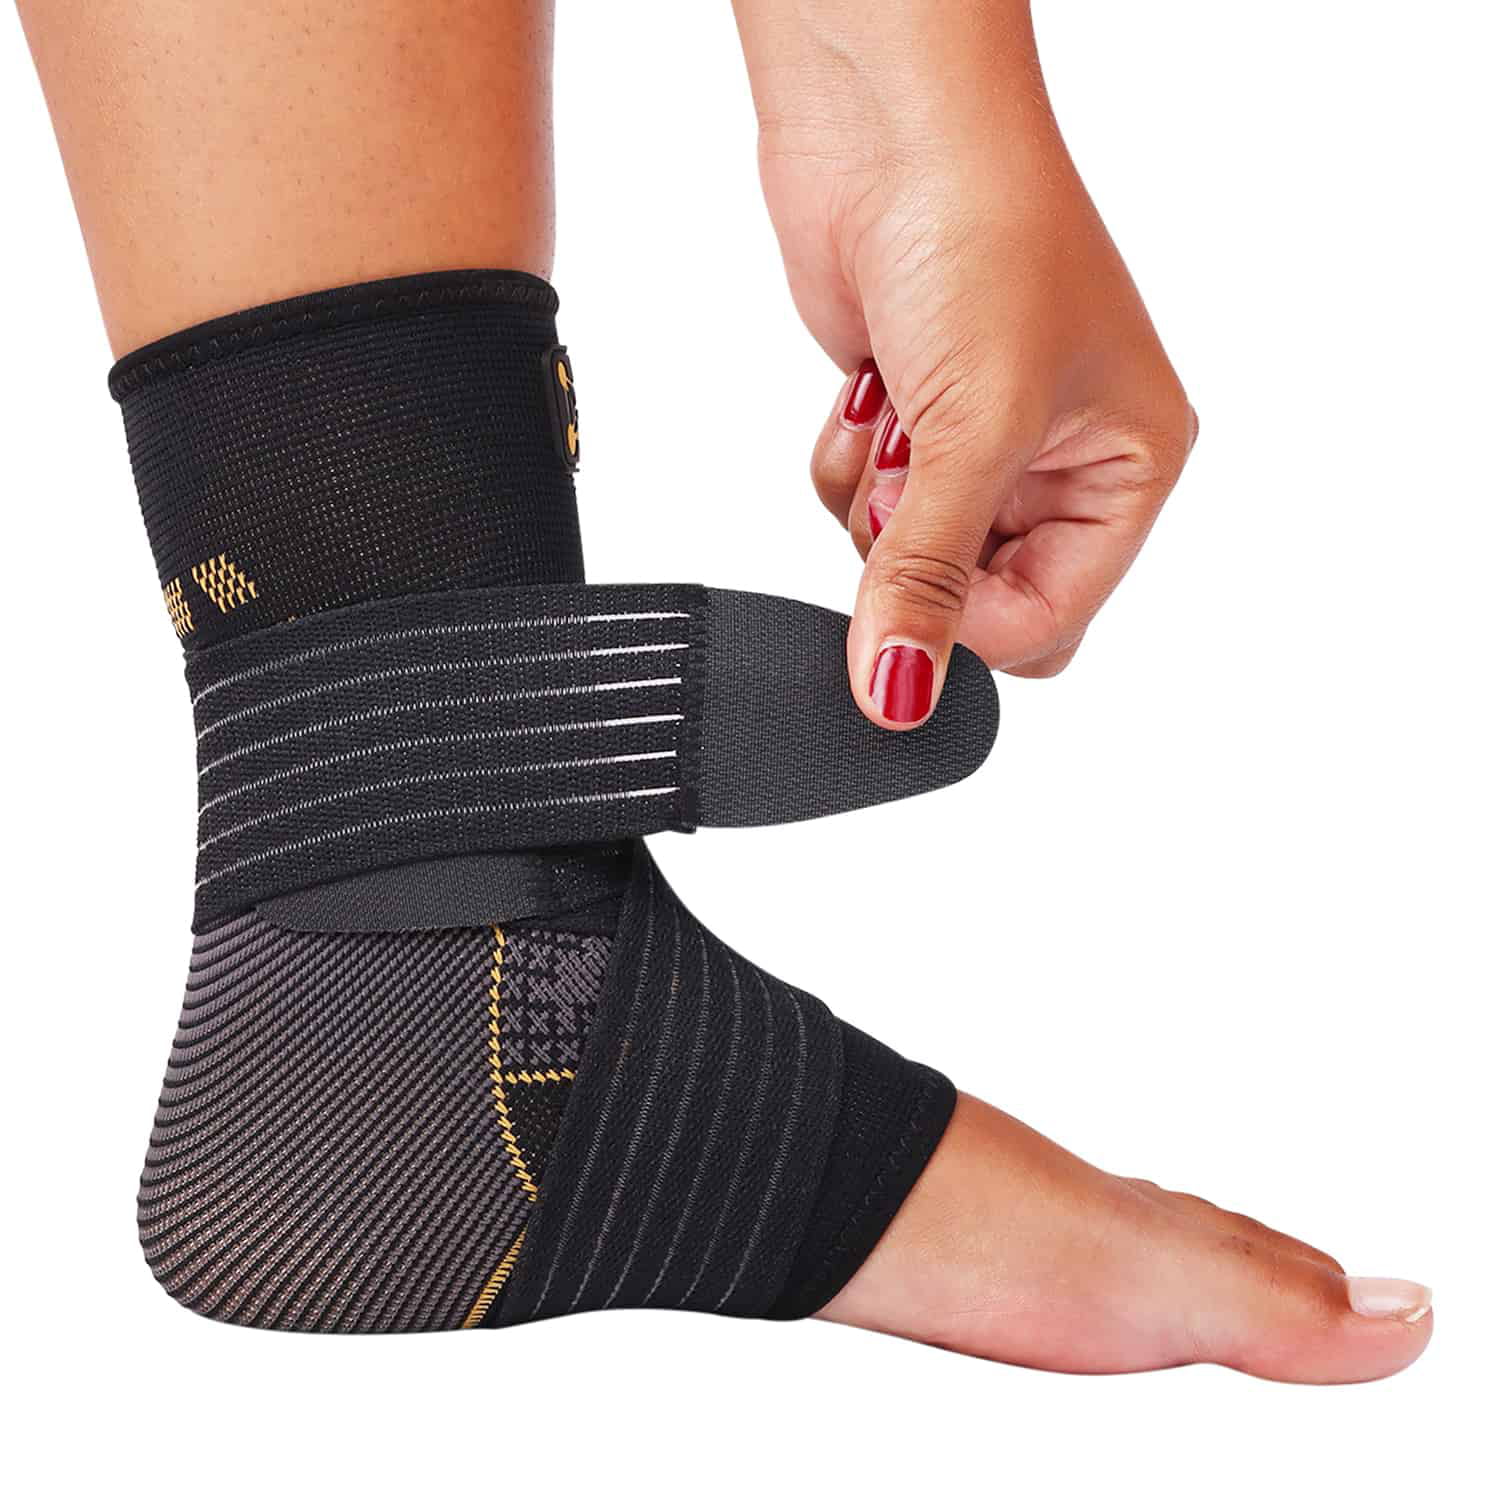 CopperJoint Ankle Support Adjustable Compression Sleeve Brace Wrap